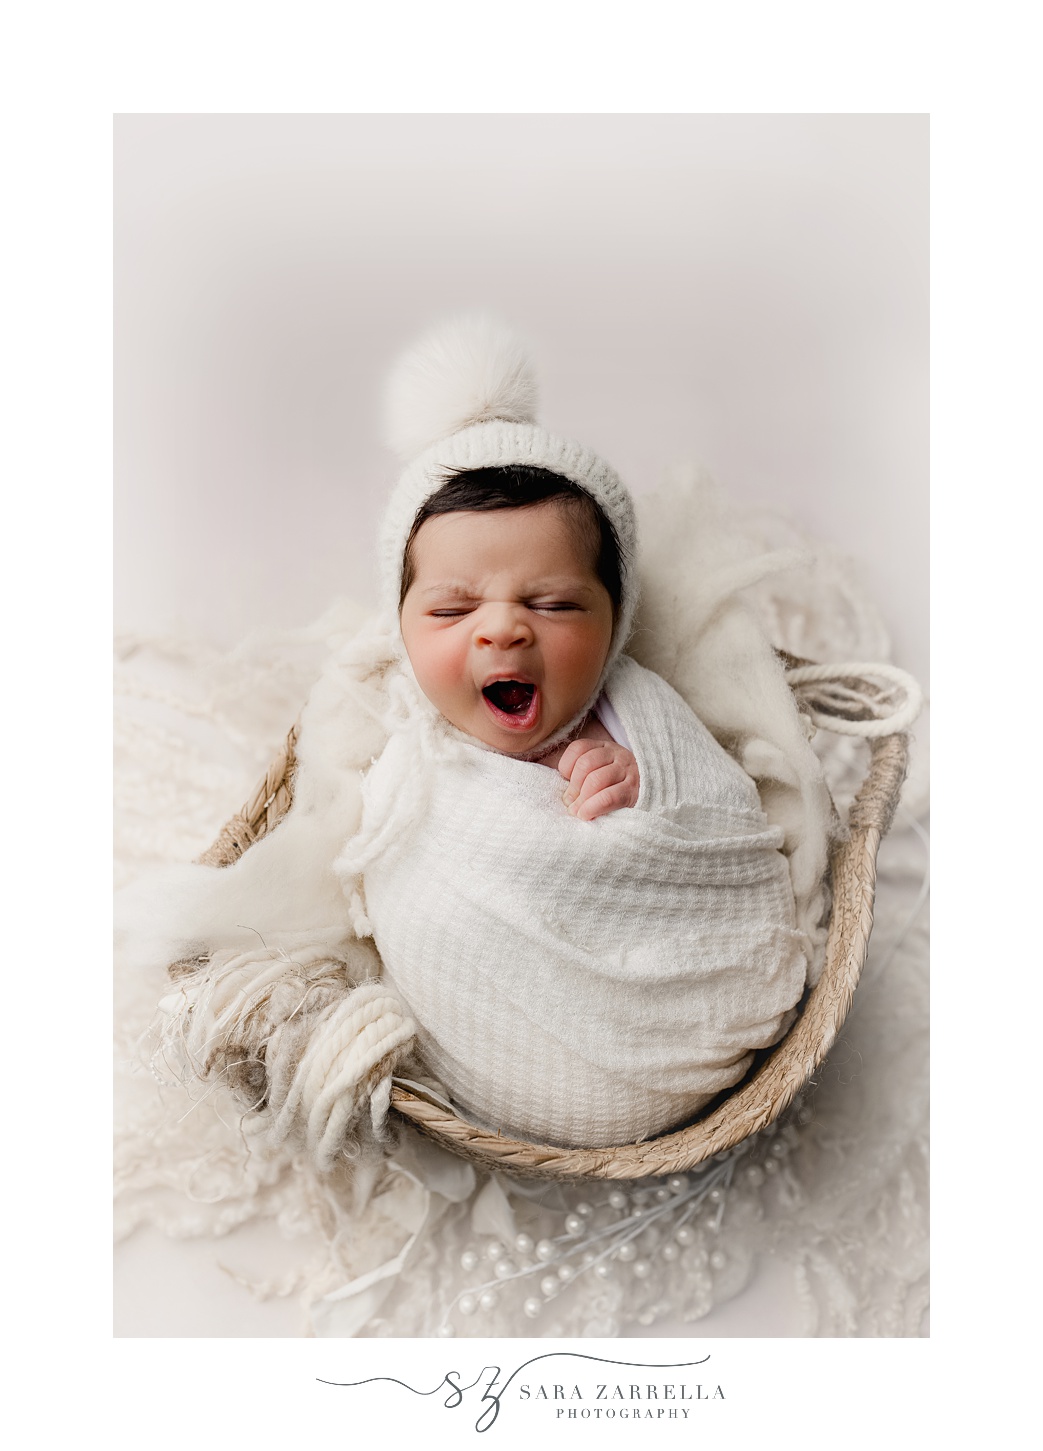 baby sleeps in white blanket and fuzzy hat